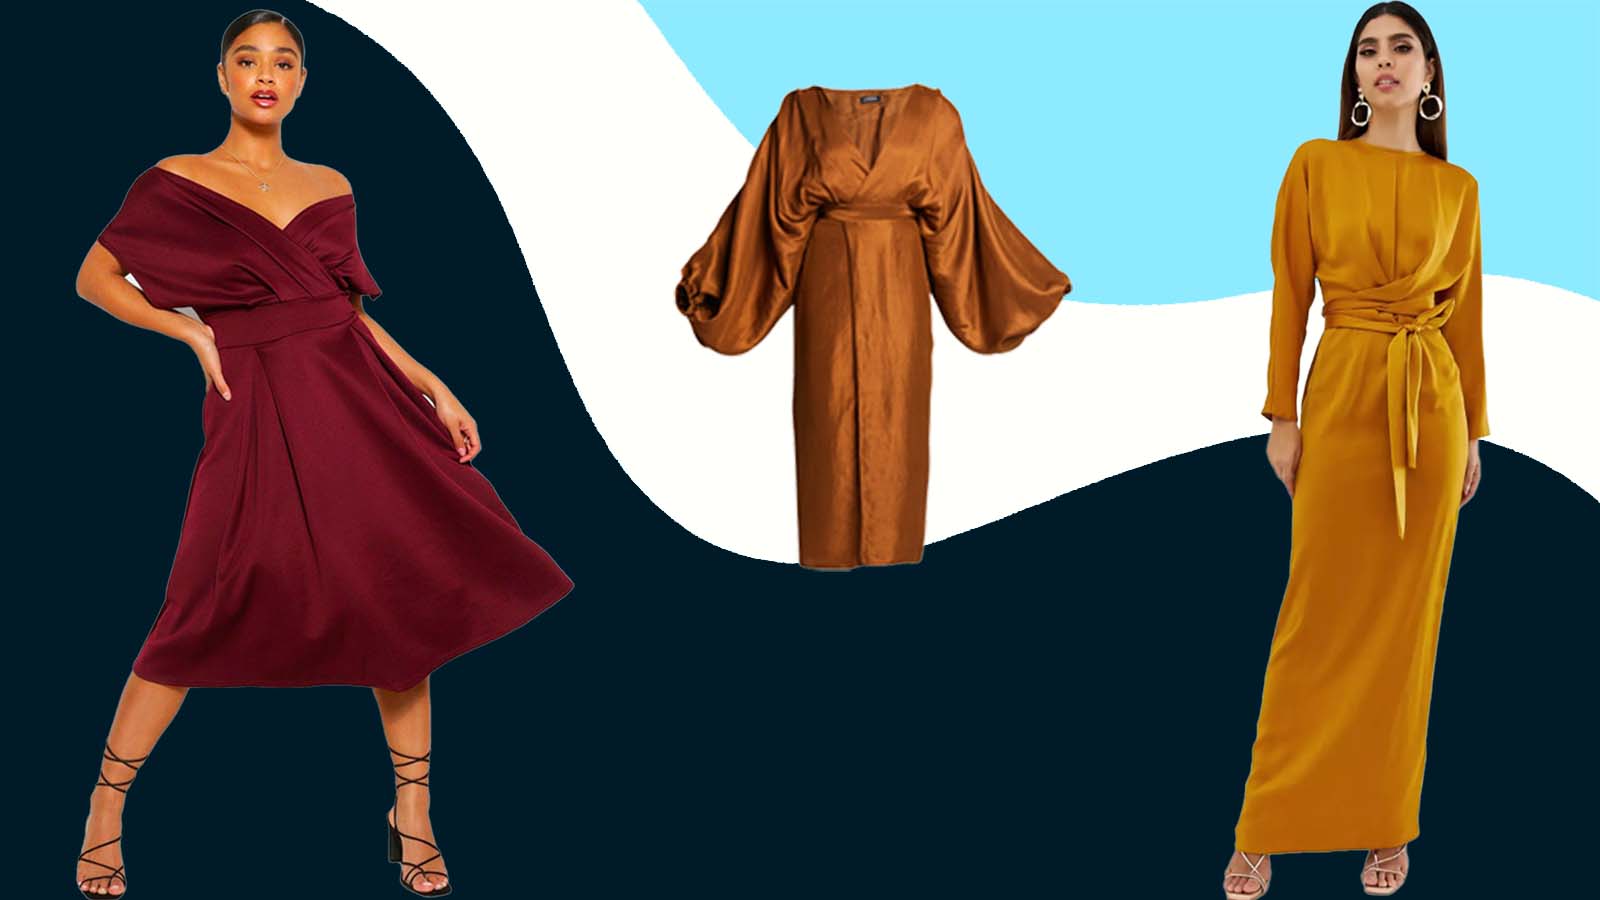 Join the endless party with beautiful dress suggestions from 4 festive colors